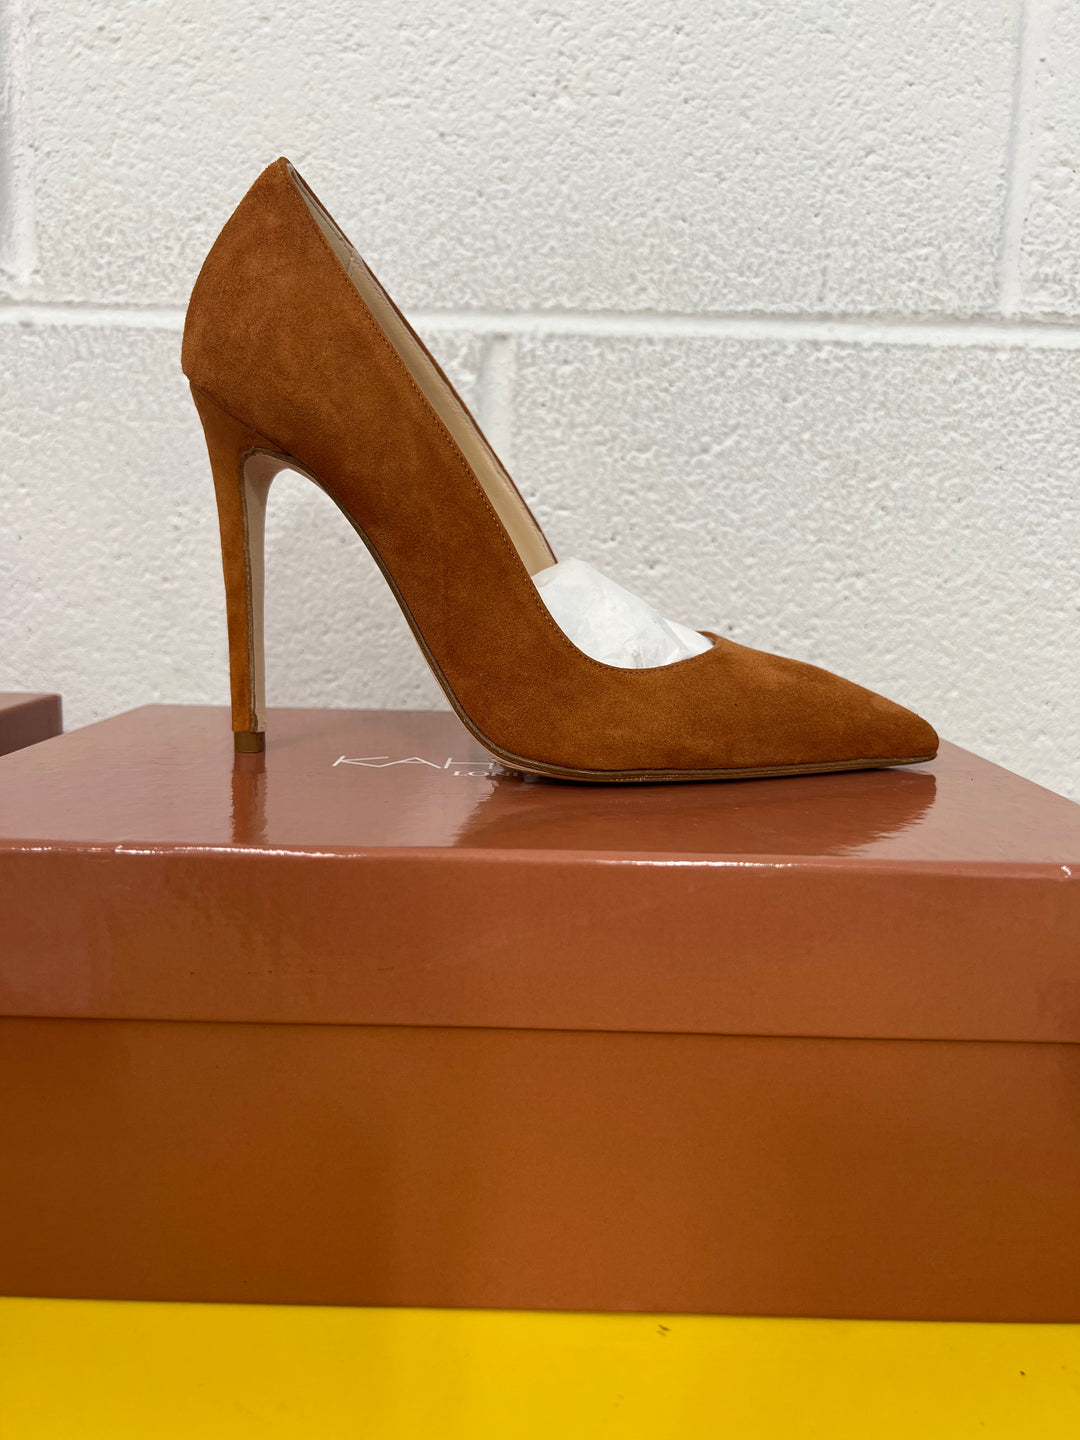 SAMPLE - Becky Pump 110mm - Rust Suede (one off color)